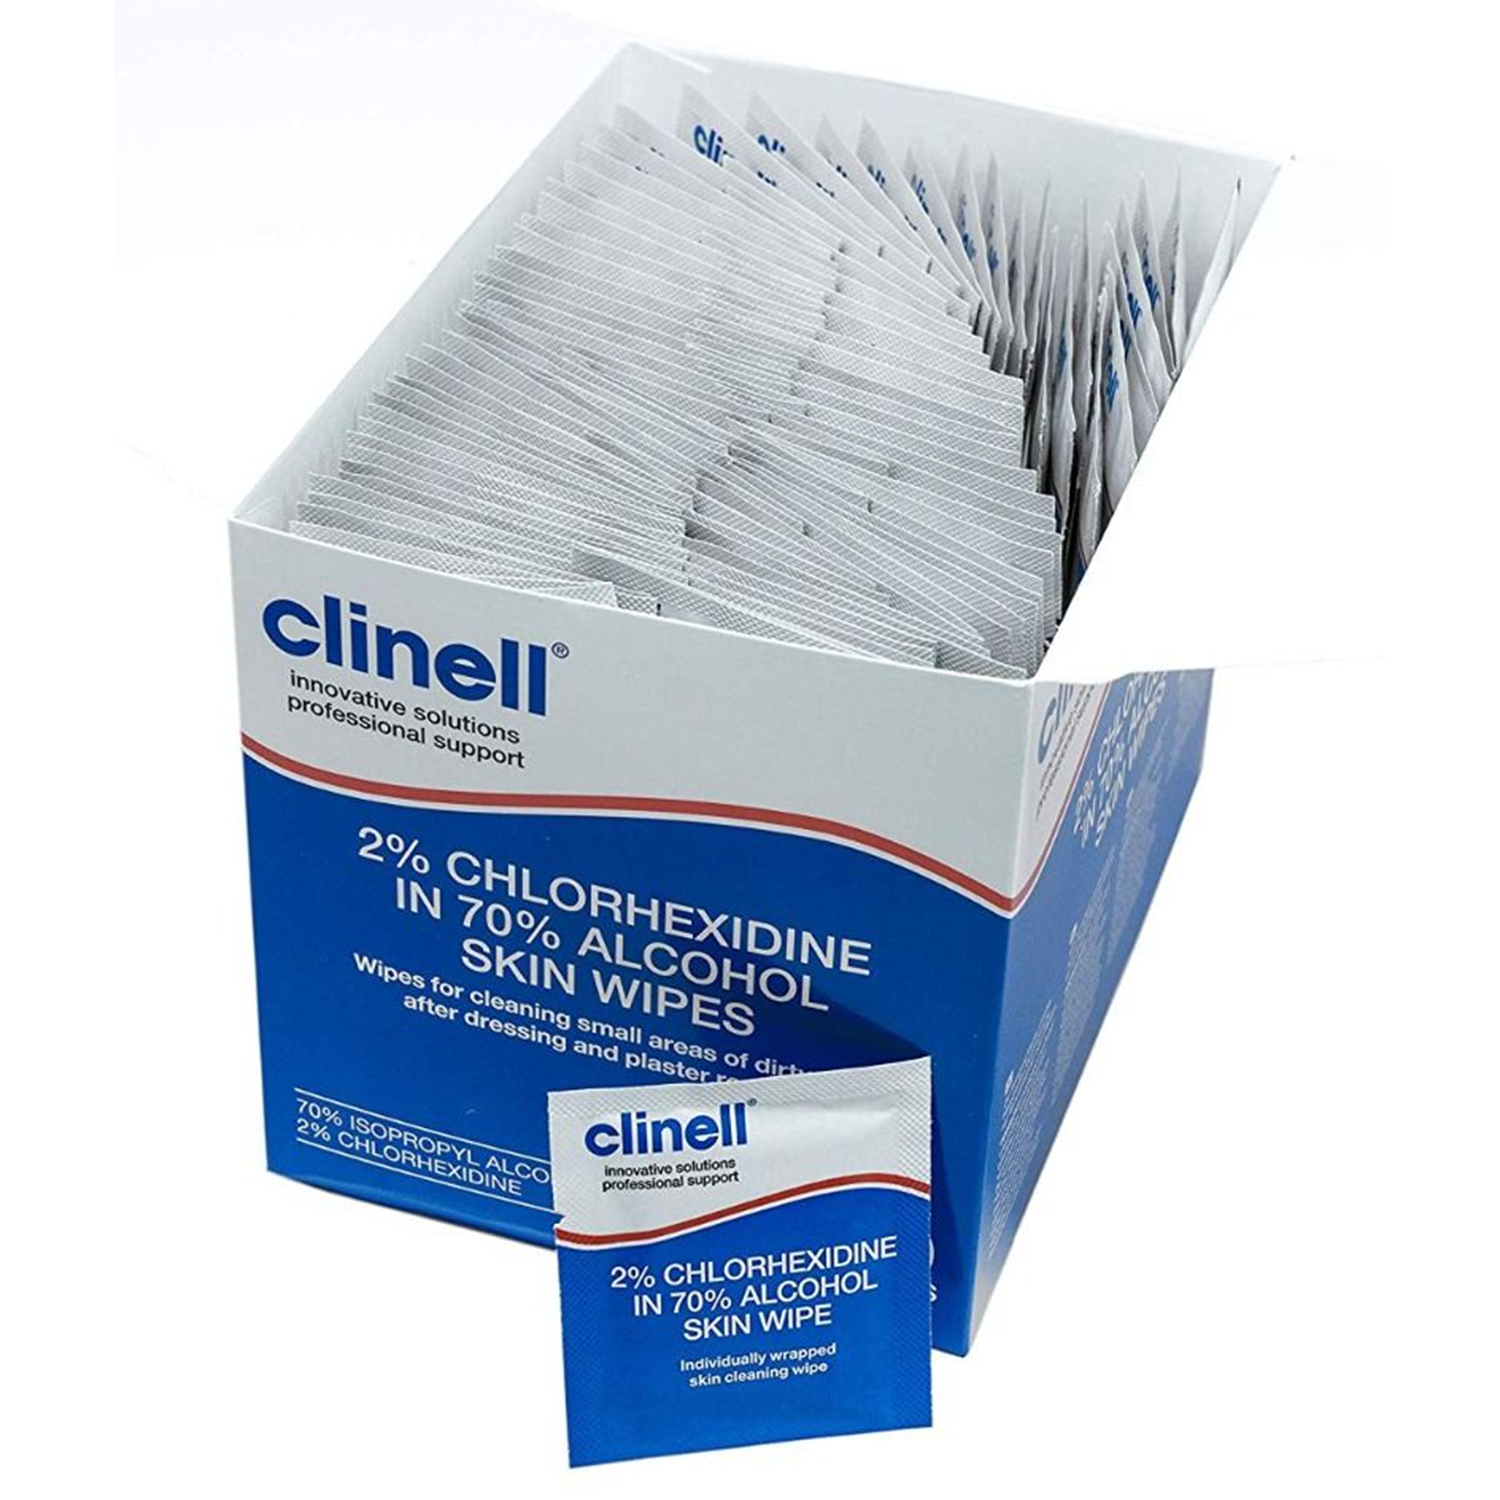 Clinell 70% Alcohol Skin Wipes Sachets | Pack of 200 (4)